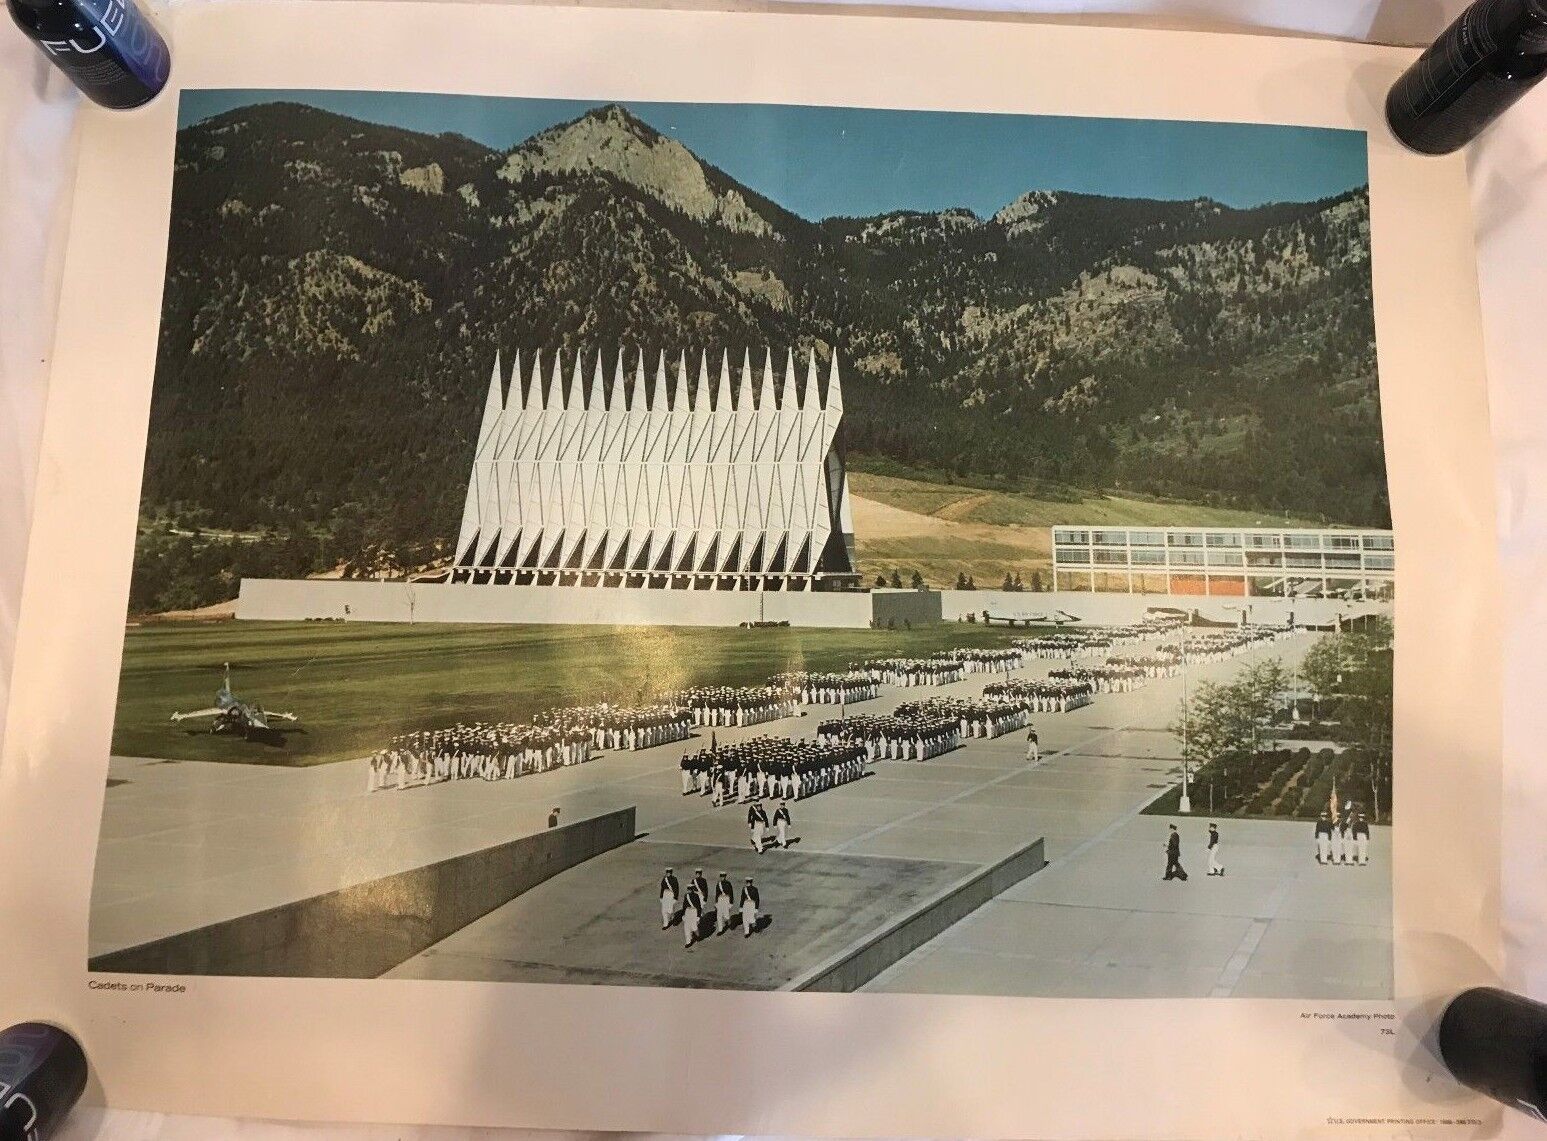 U.S. AIR FORCE ACADEMY PHOTO POSTER 73L CADETS ON PARADE. VINTAGE. RARE